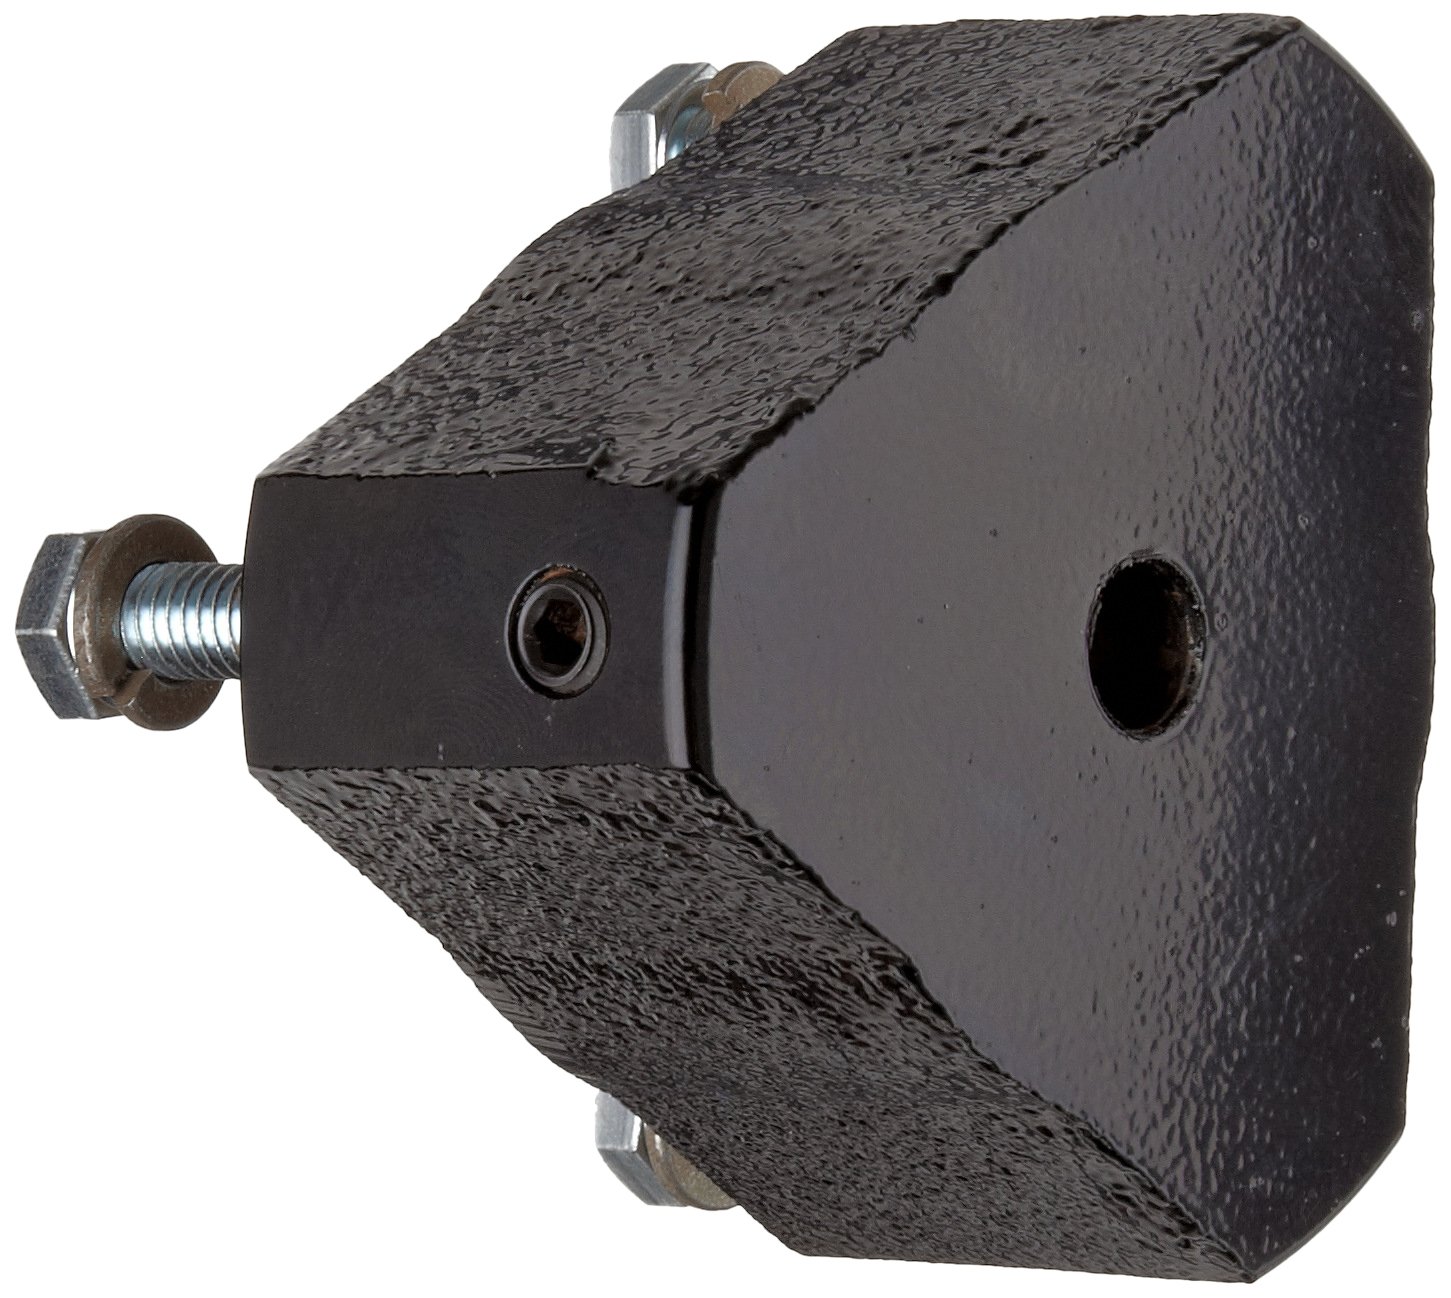 Coupling Hub, Triangular, With Keyway, 1.34 Inch Bore, Ductile Iron